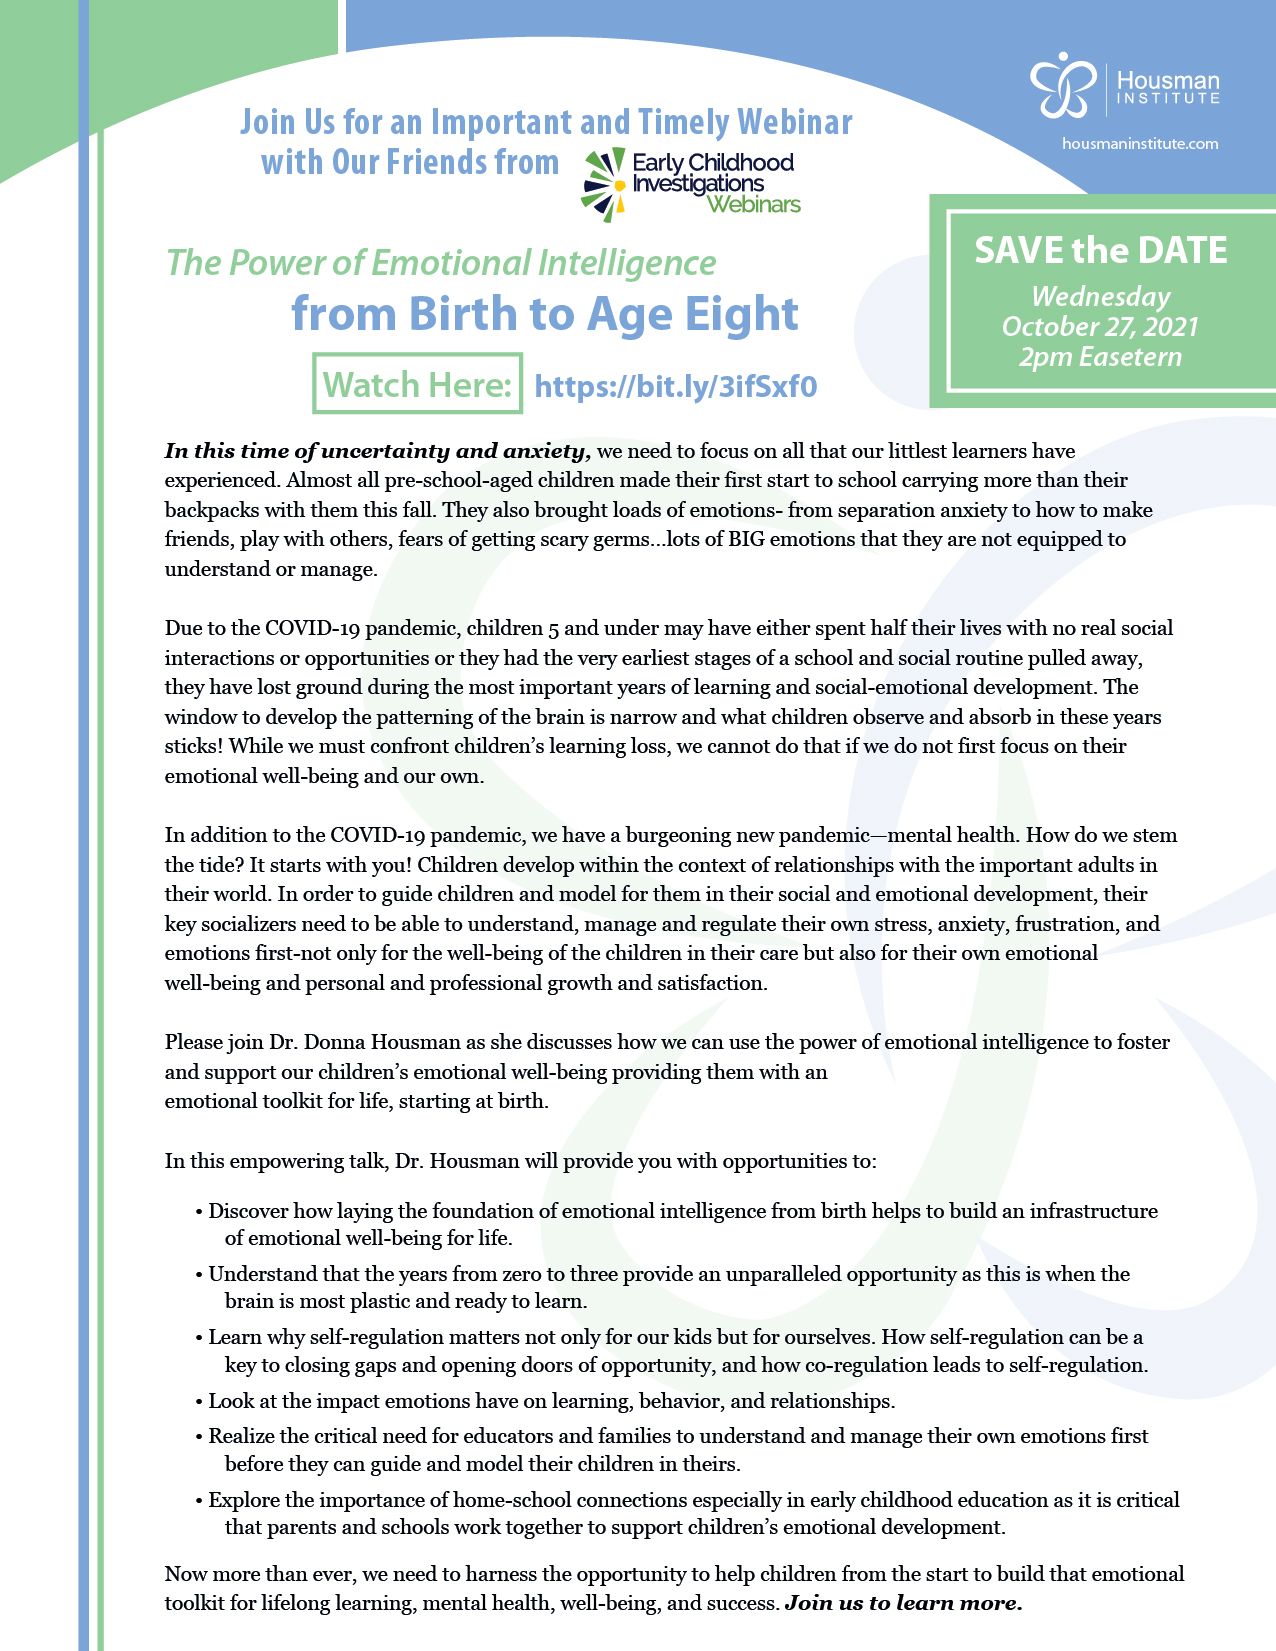 A Special Webinar Event with Our Friends at Early Childhood Investigations